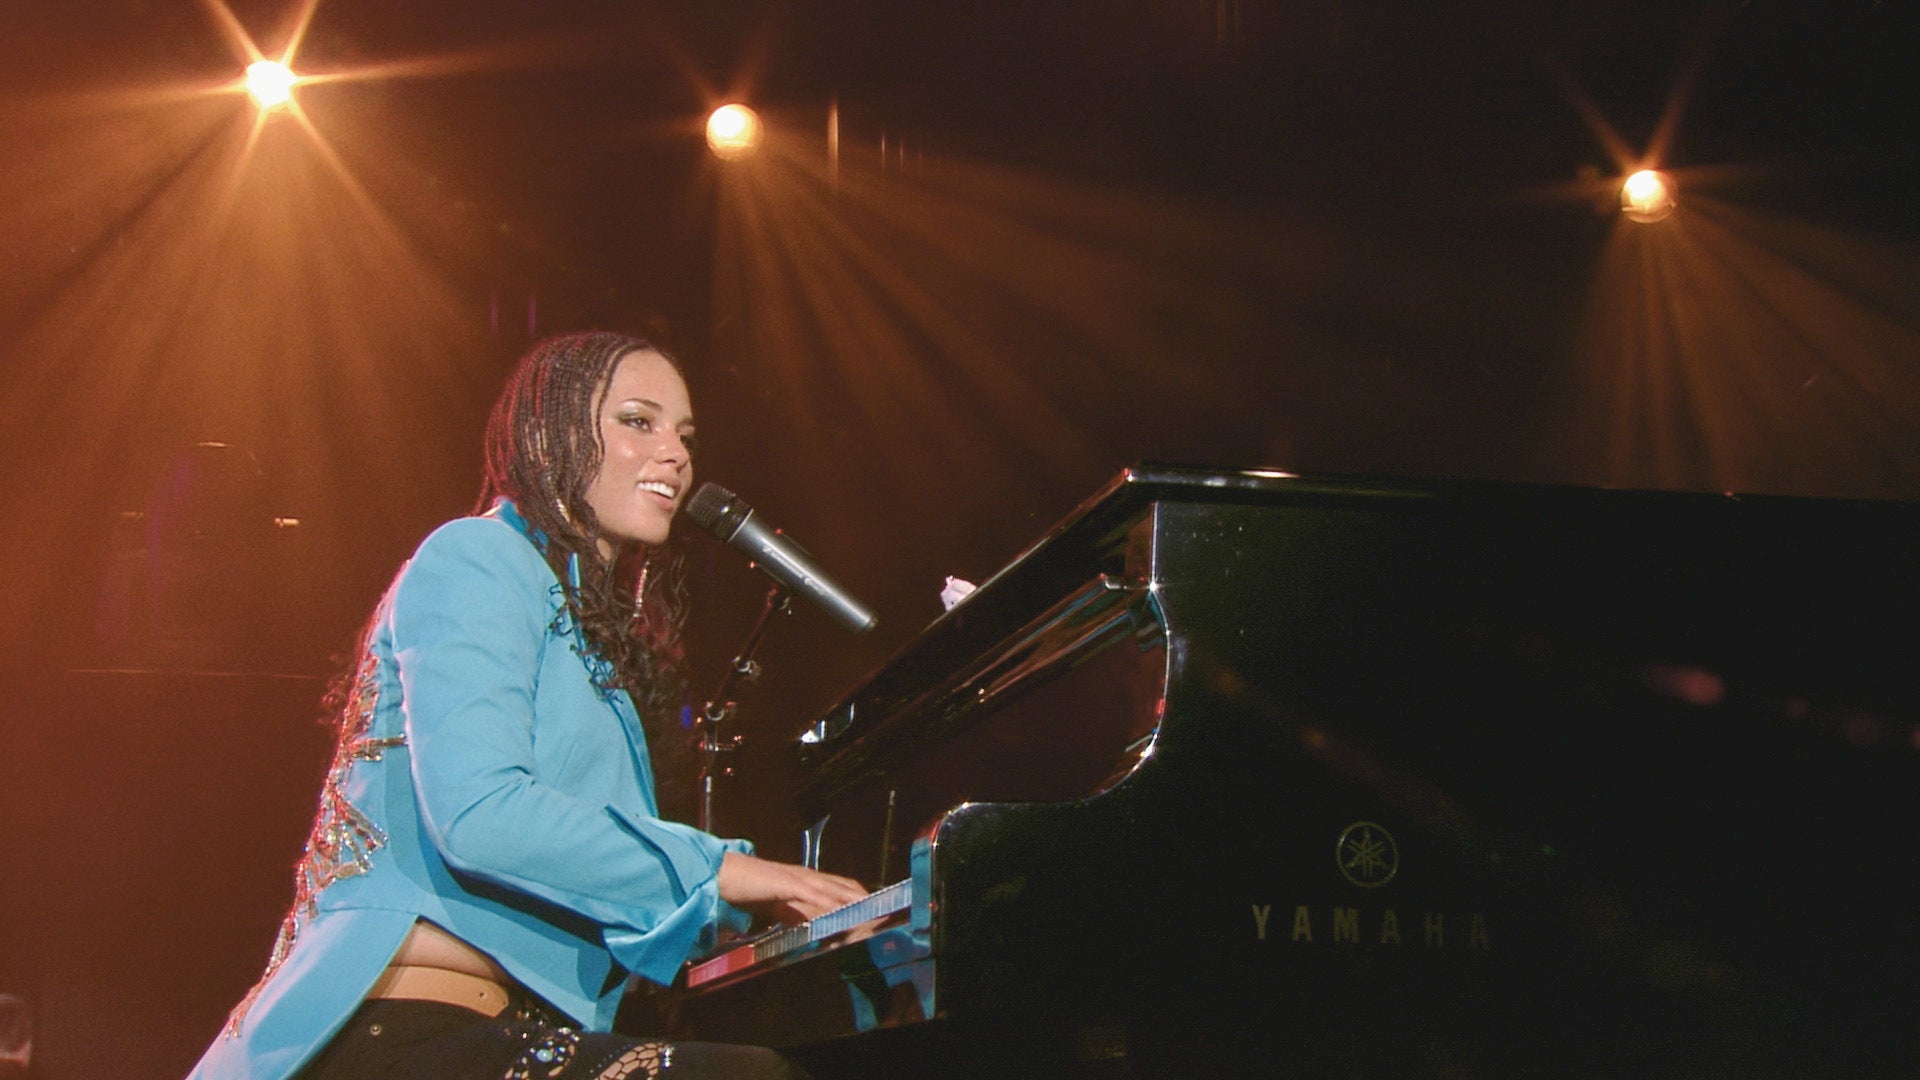 Alicia Keys performing at the Montreux Jazz Festival